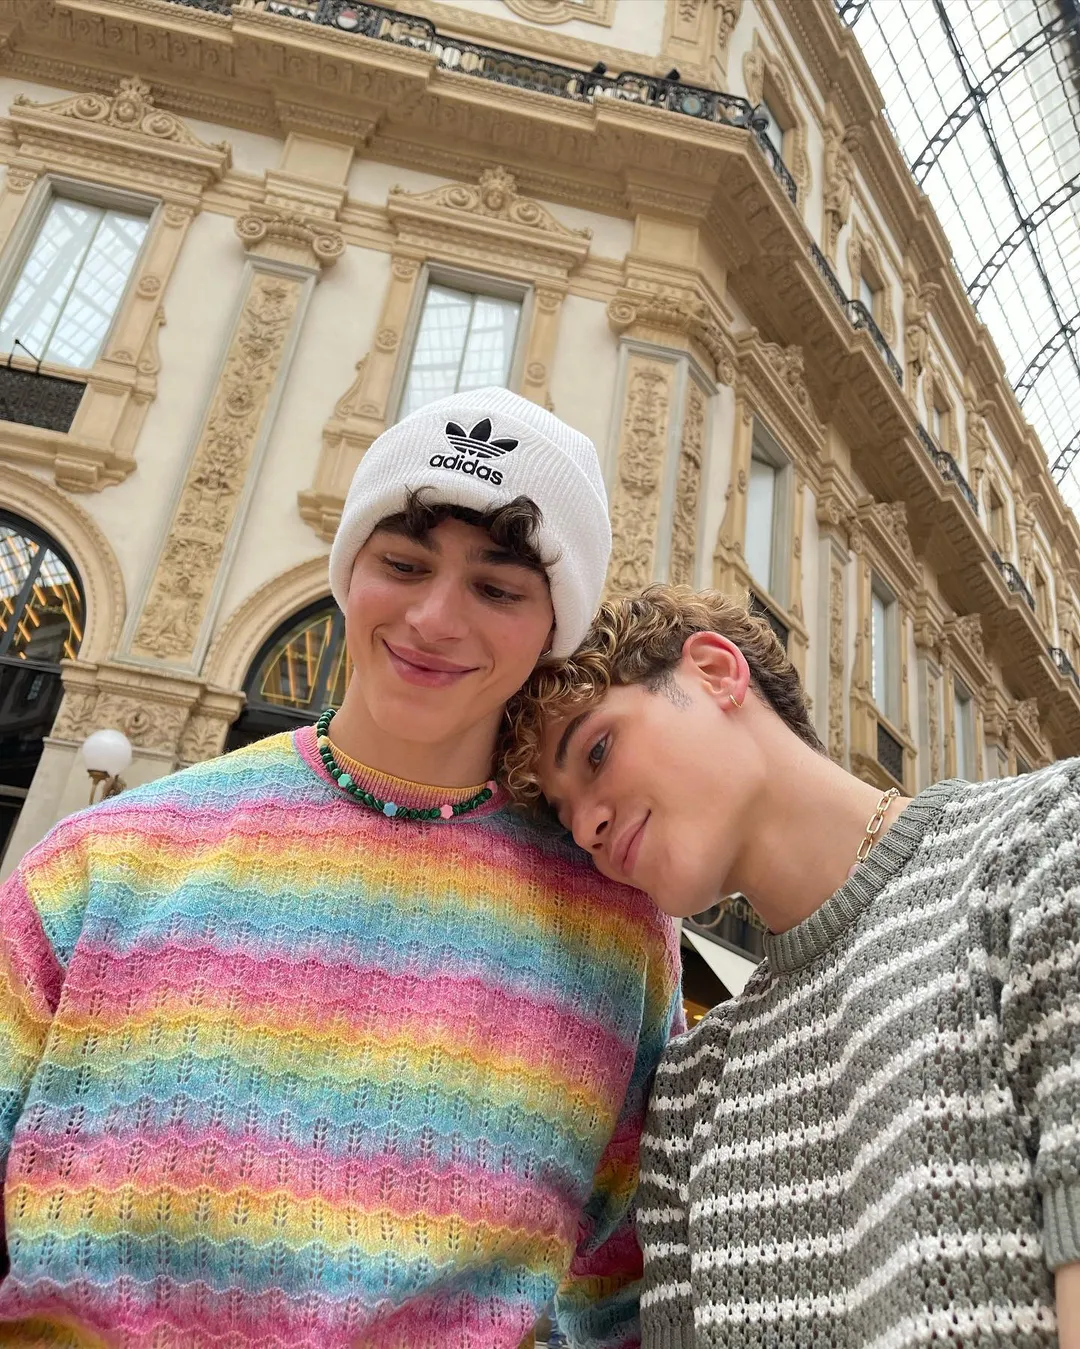 Nicky Champa and his boyfriend Pierre Boo enjoying their vacation in Milan, Italy